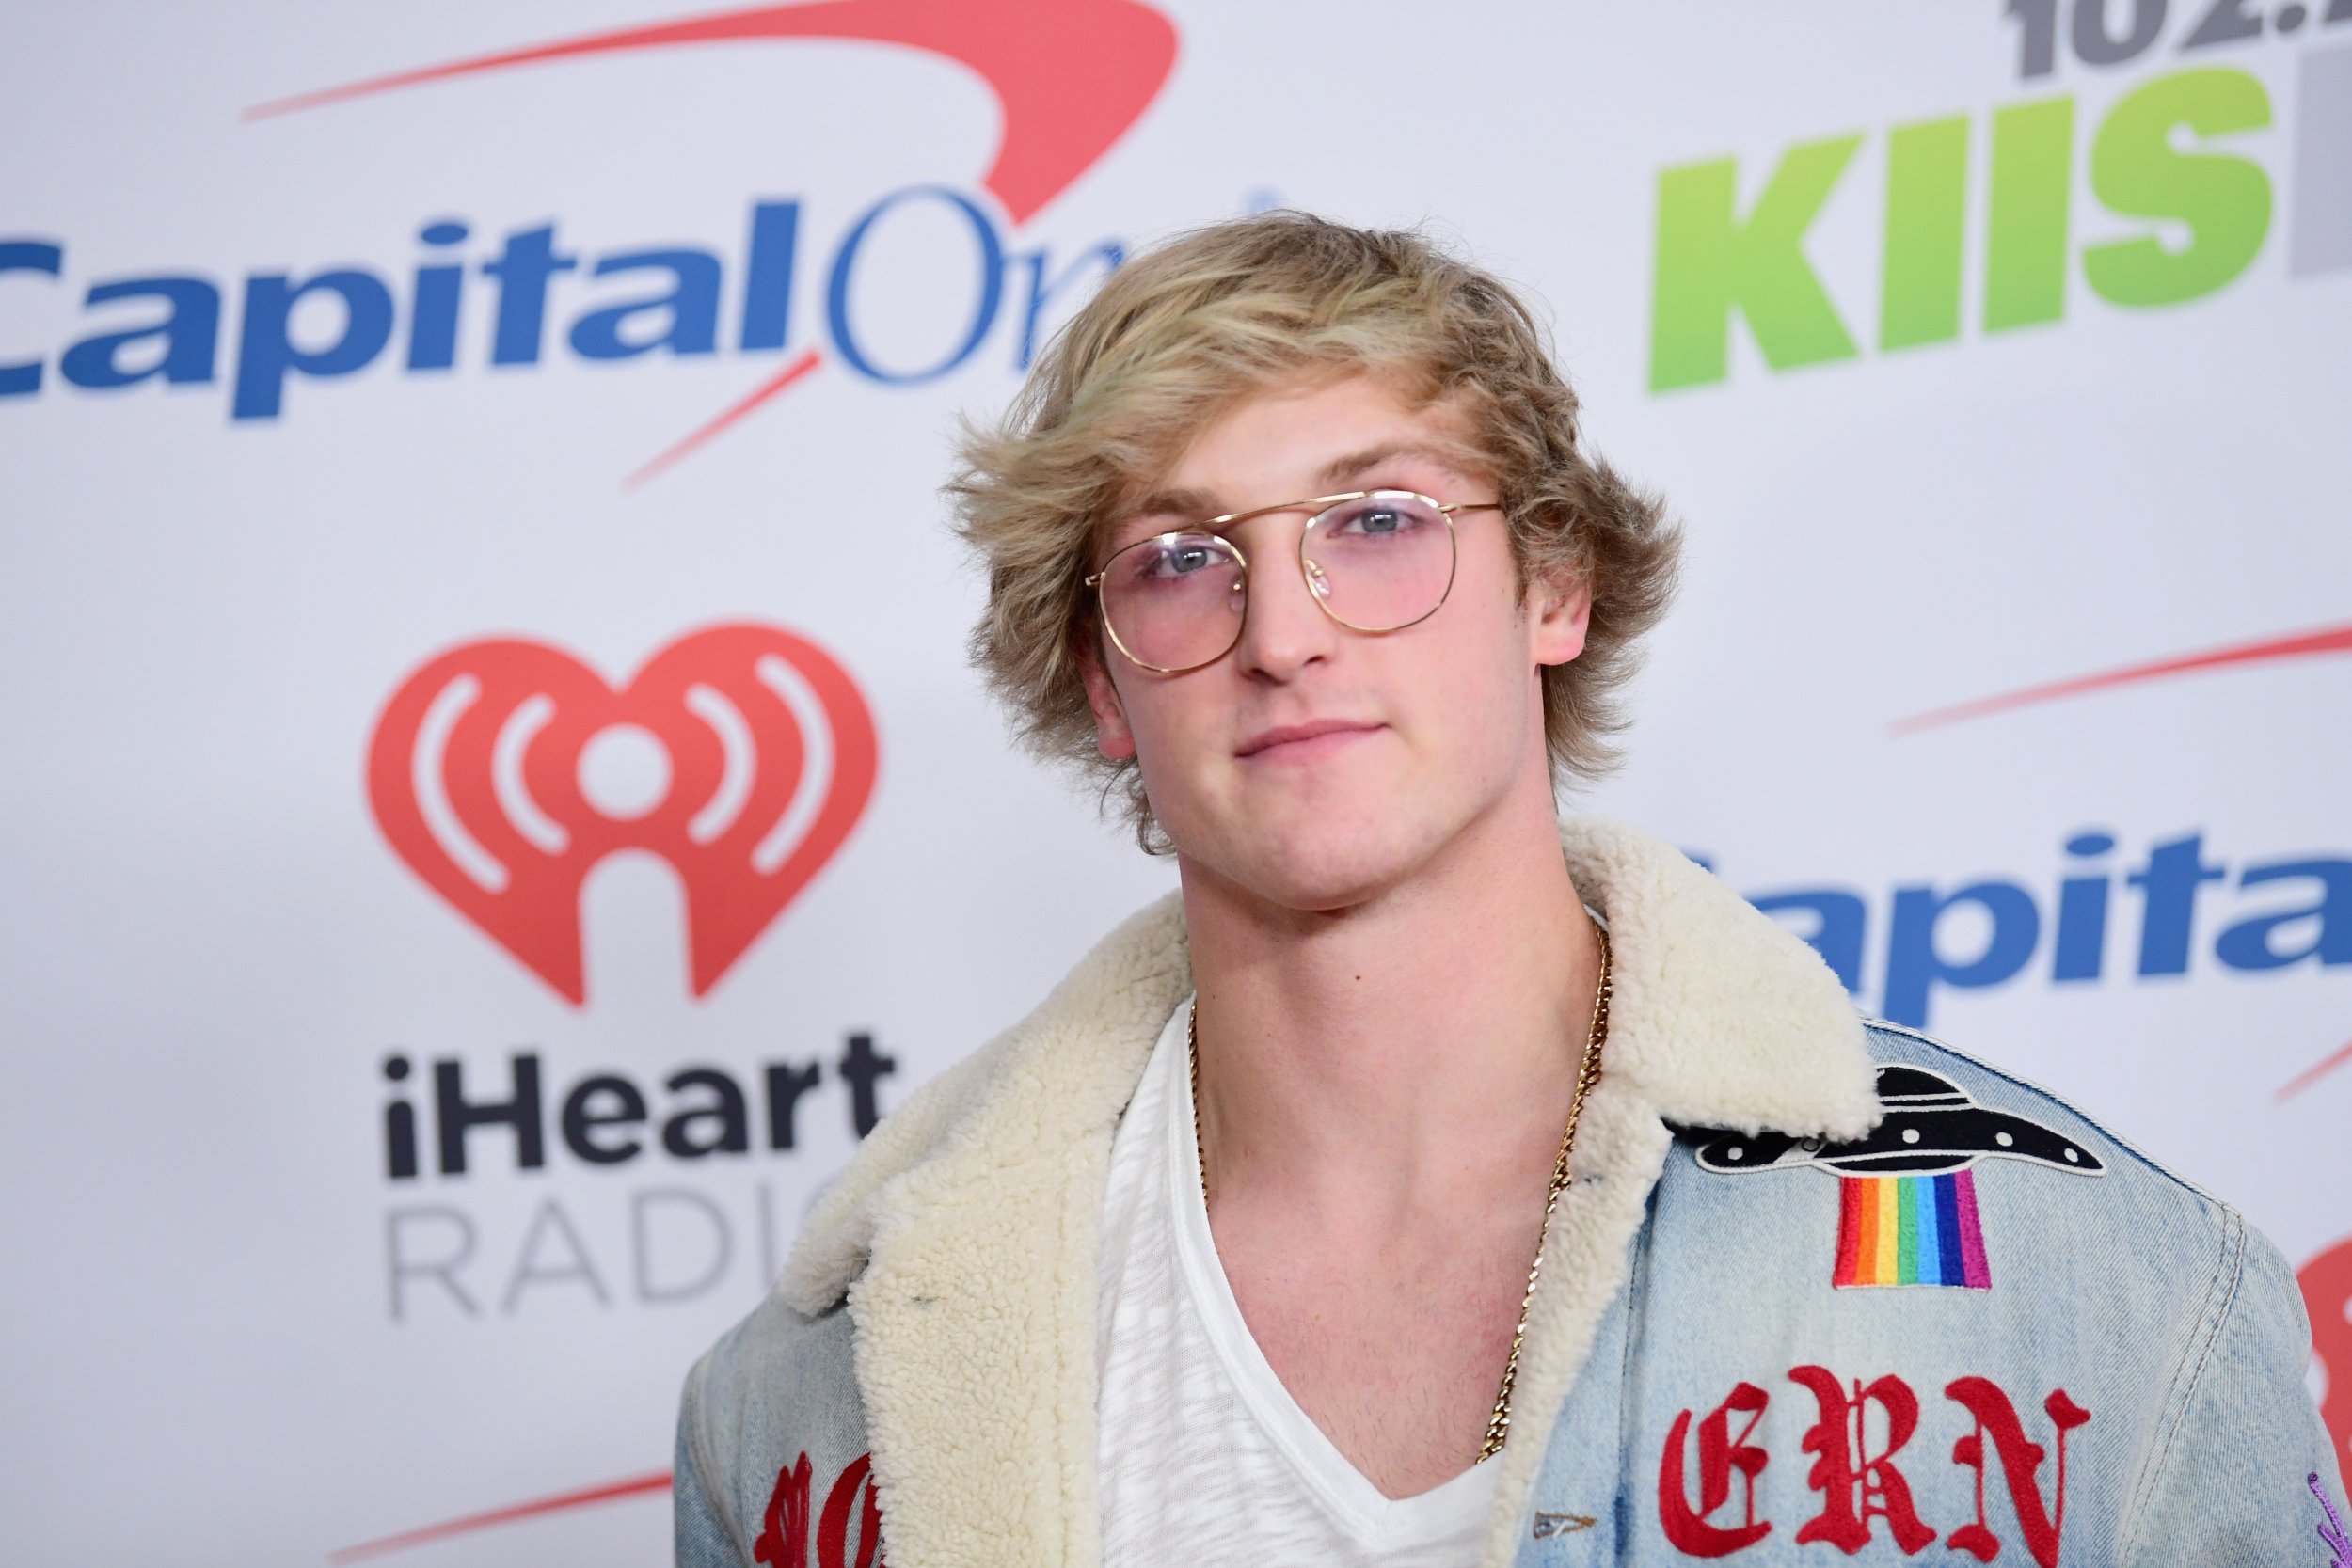 Logan Paul apology over suicide video